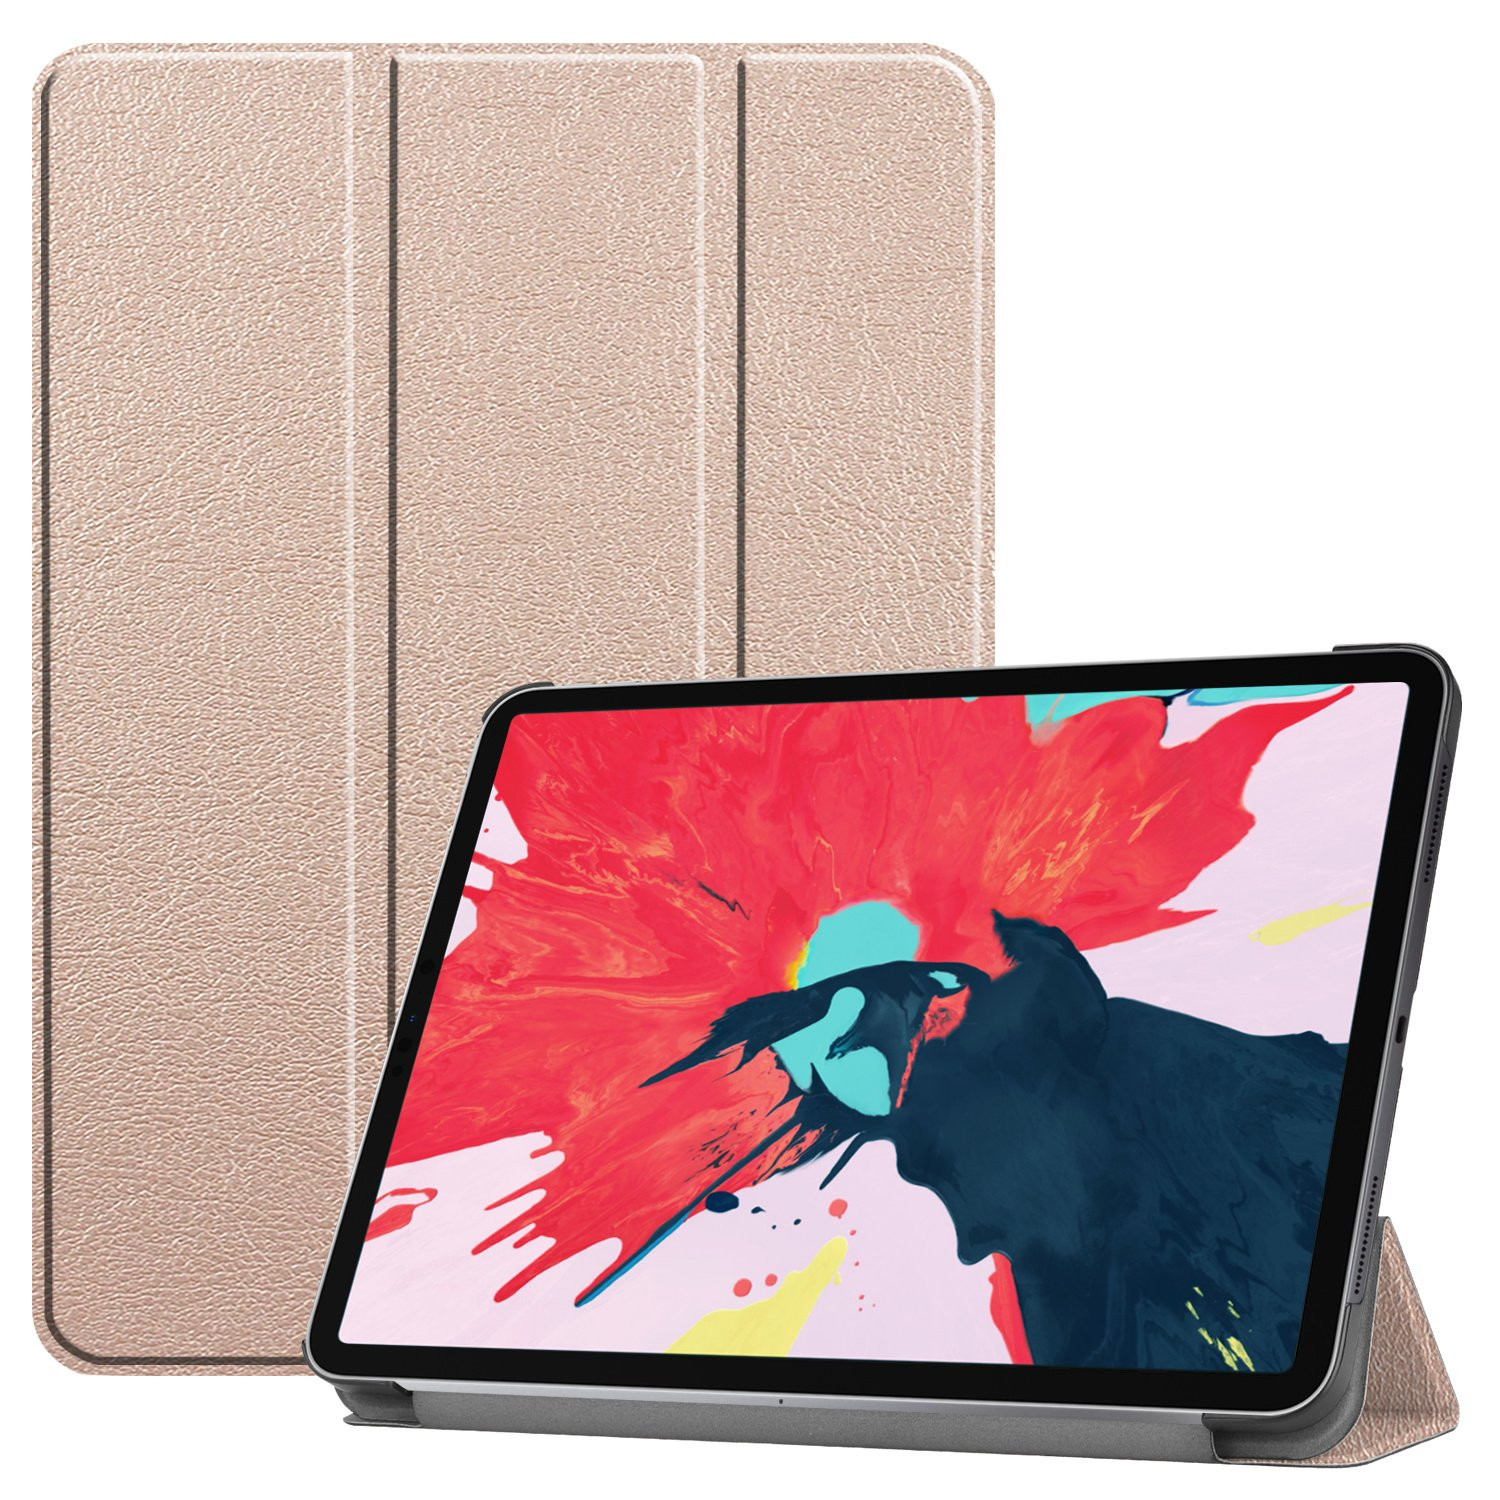 3-Vouw sleepcover hoes - iPad Pro 11 inch (2020) - Goud